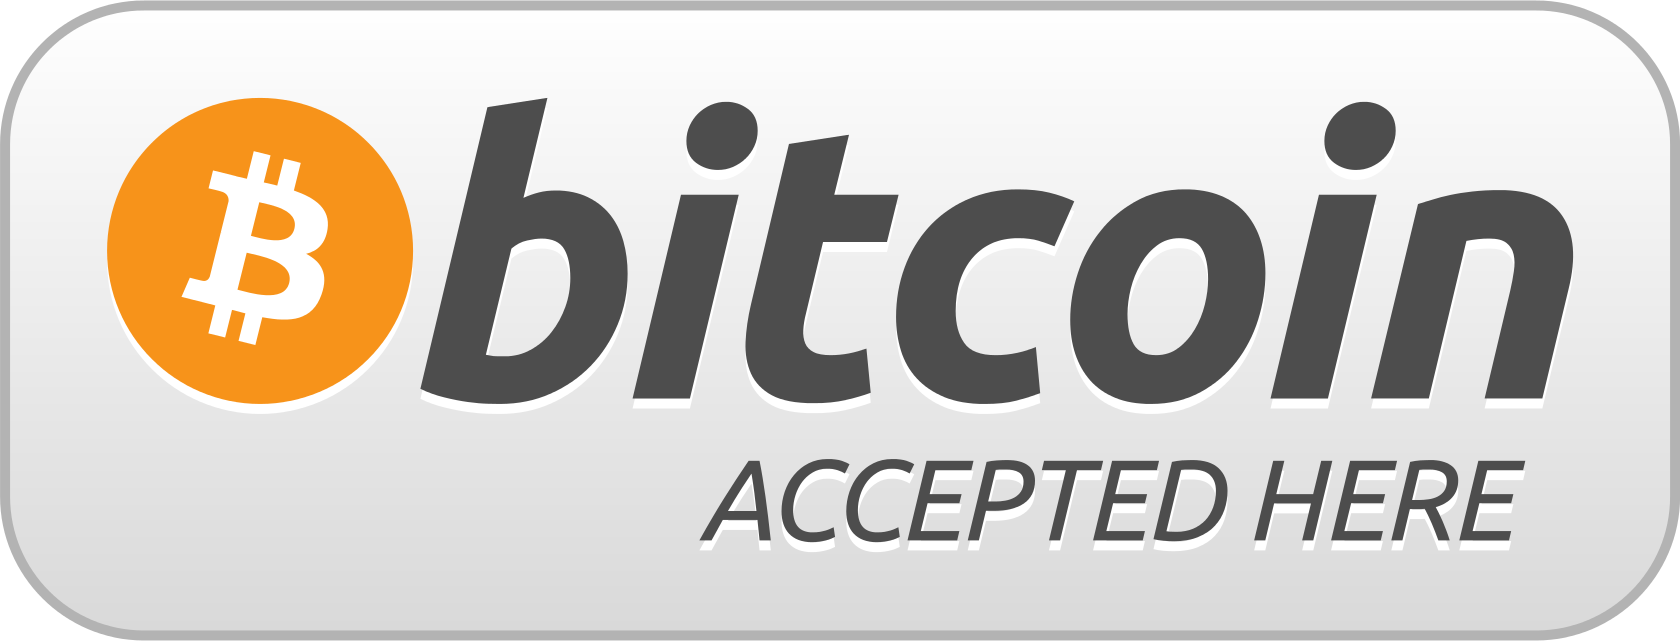 Bitcoin Accepted Here PNG HD pngteam.com